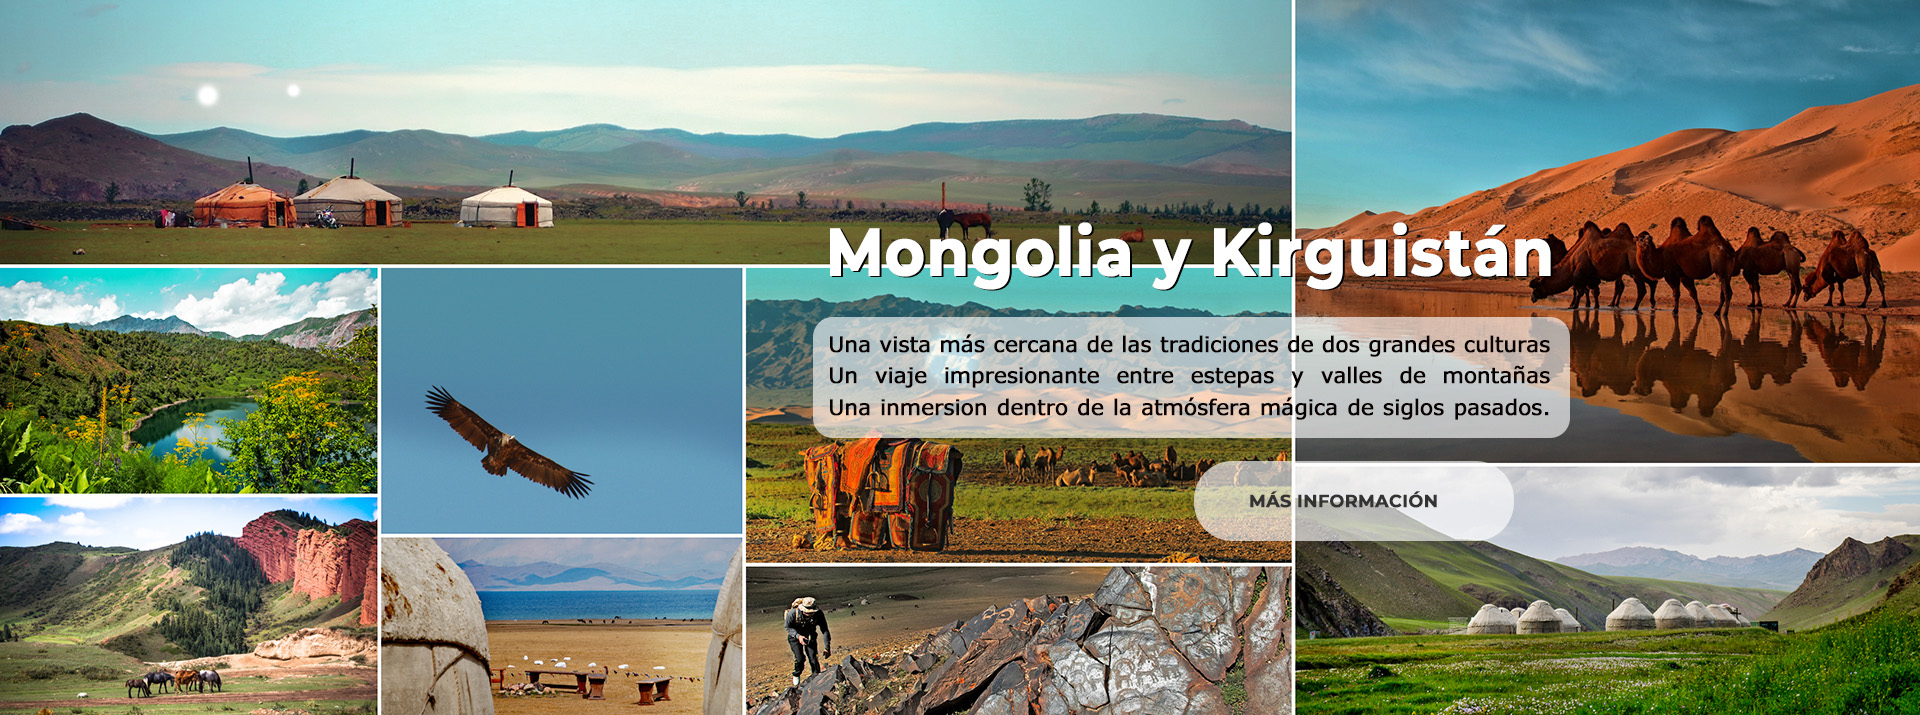 KG and Mongolia